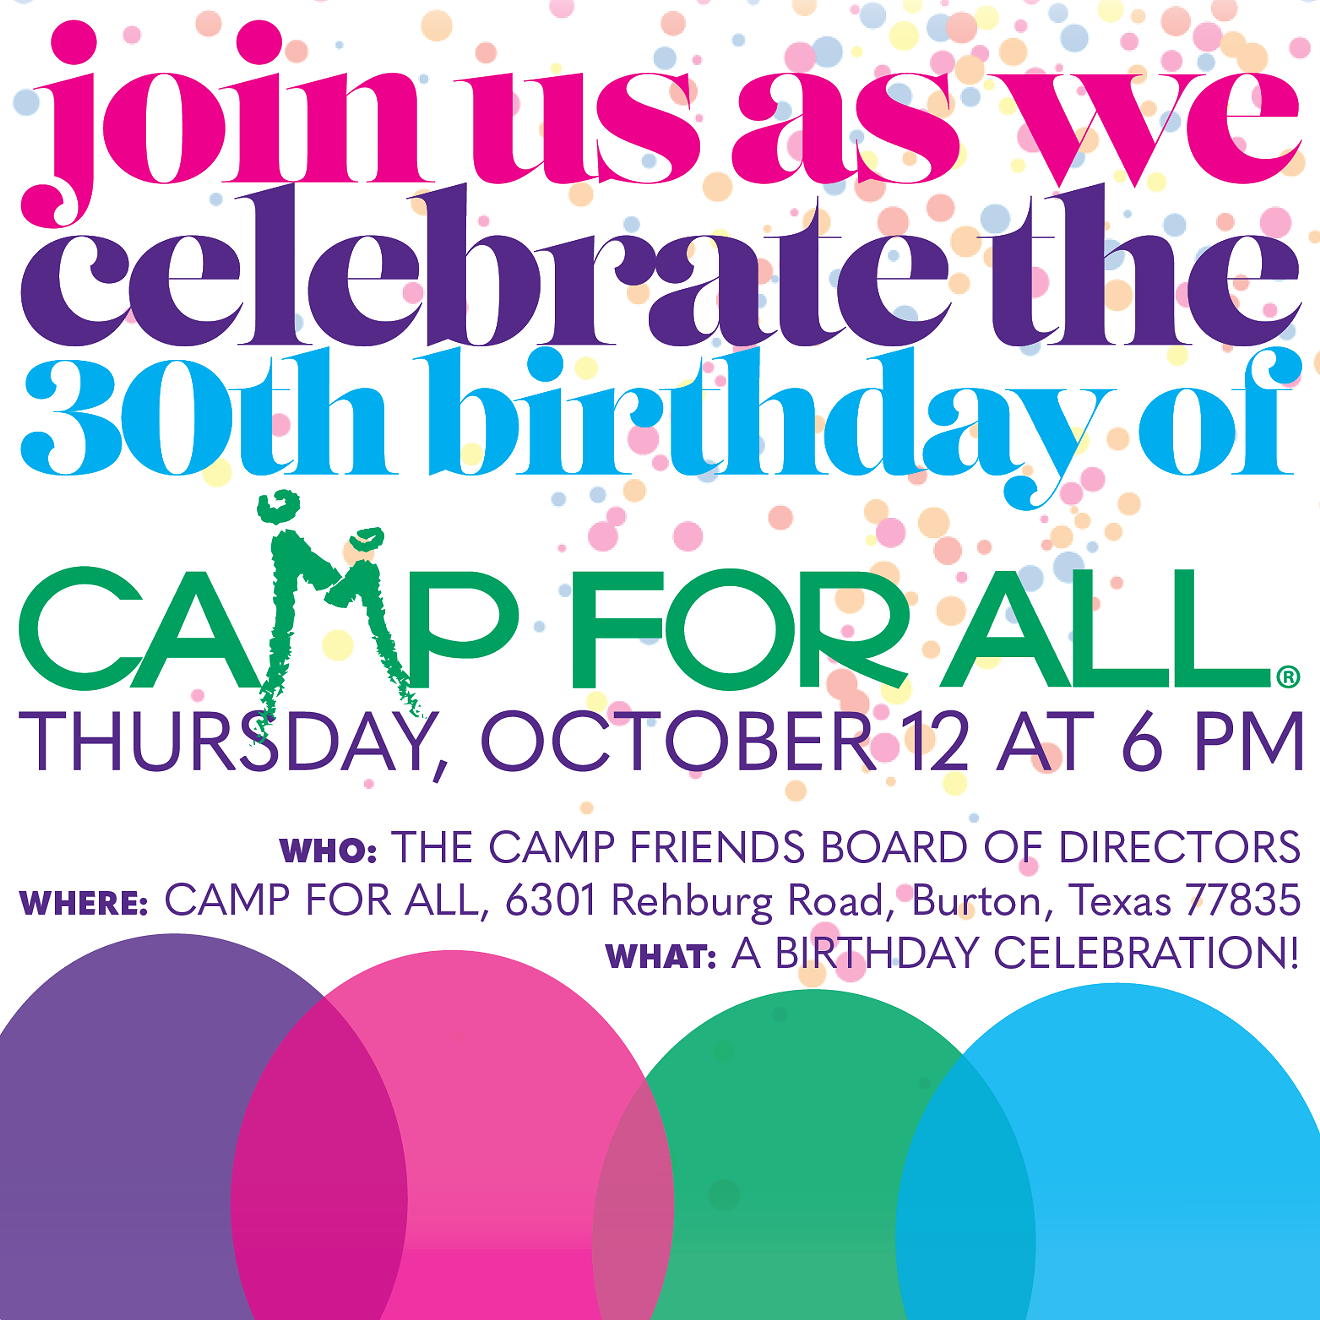 camp-for-all-30th-birthday-party-gala---graphic-3.png